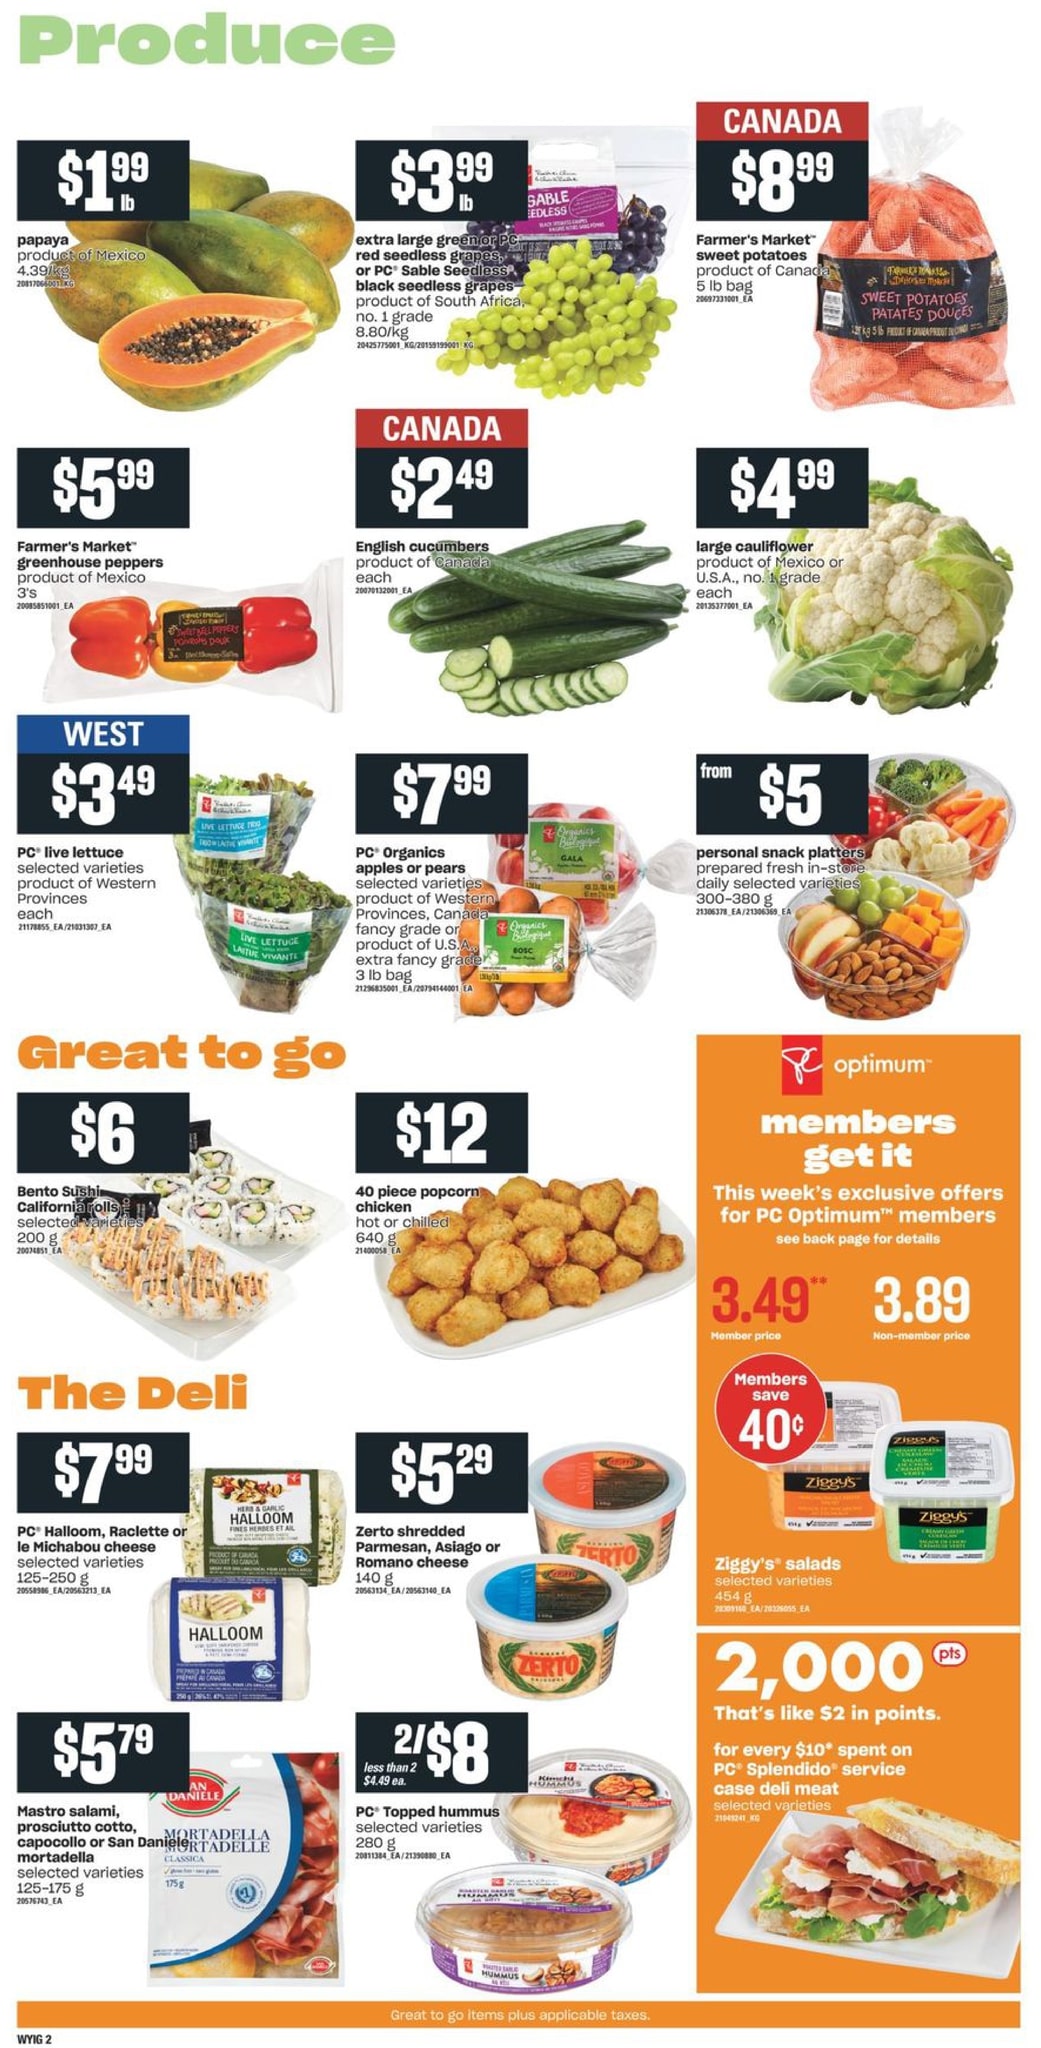 Independent British Columbia - Weekly Flyer Specials - Page 4